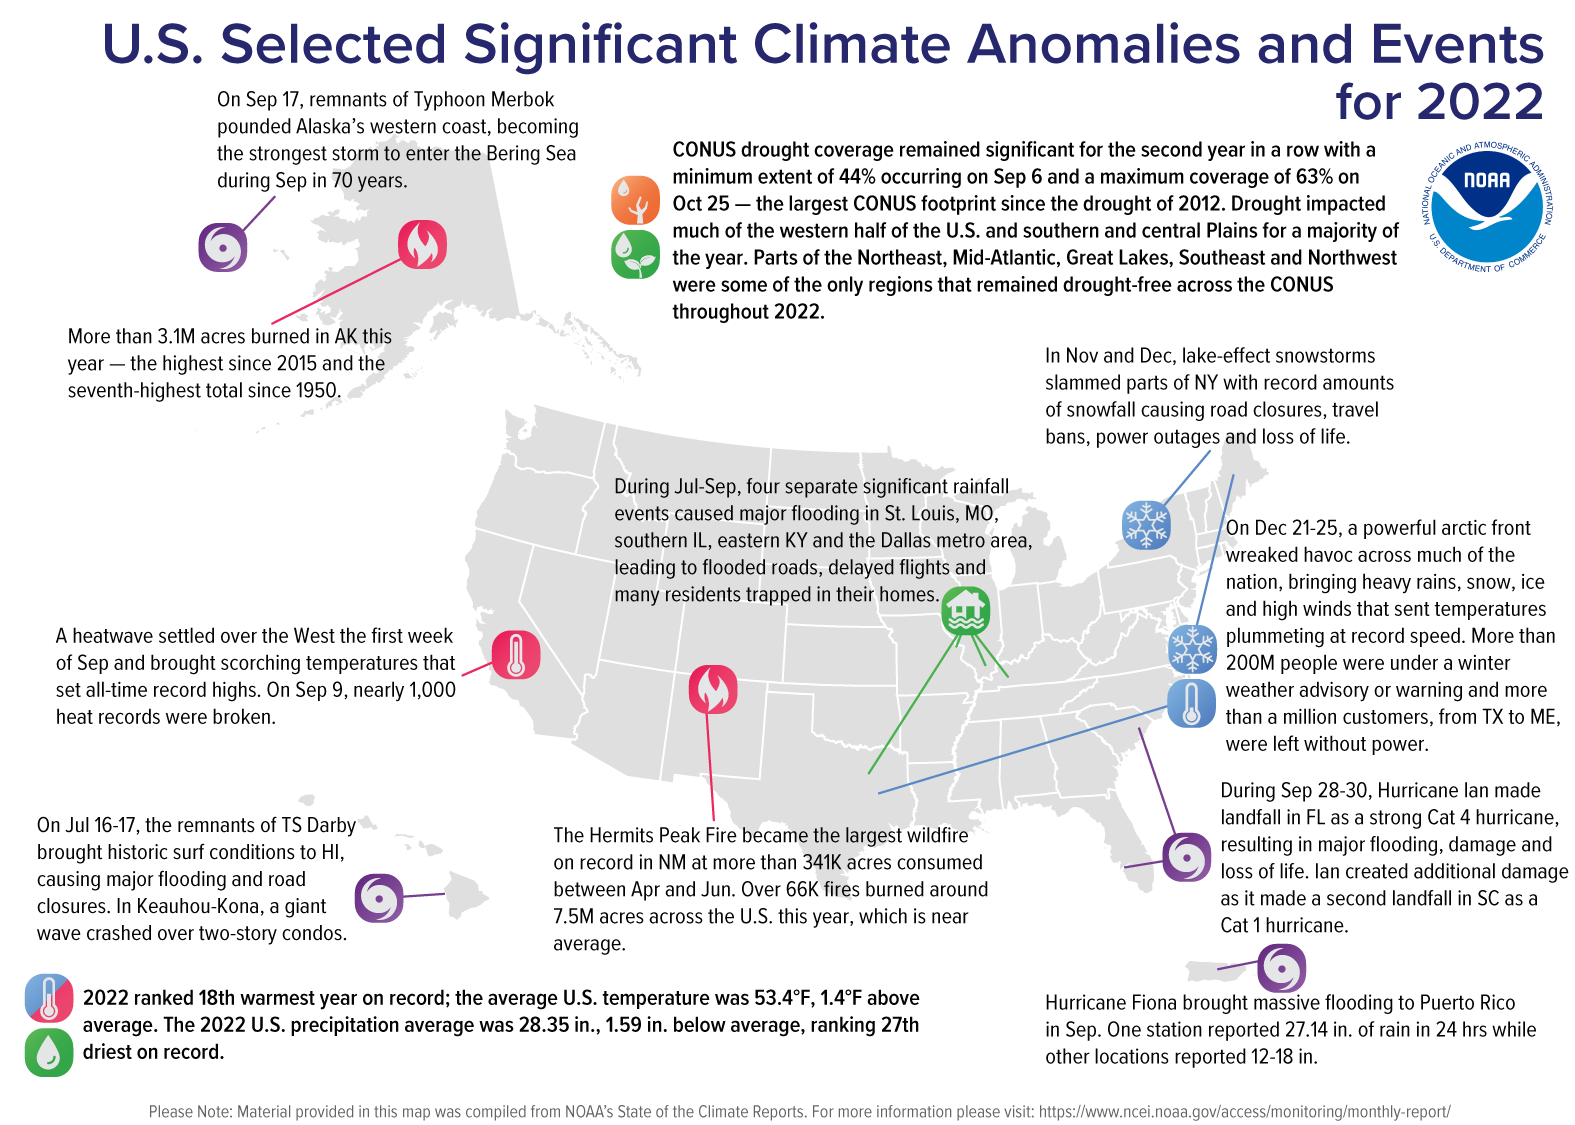 https://www.ncei.noaa.gov/monitoring-content/sotc/national/2022/ann/monthlysigeventsmap-annual2022.png